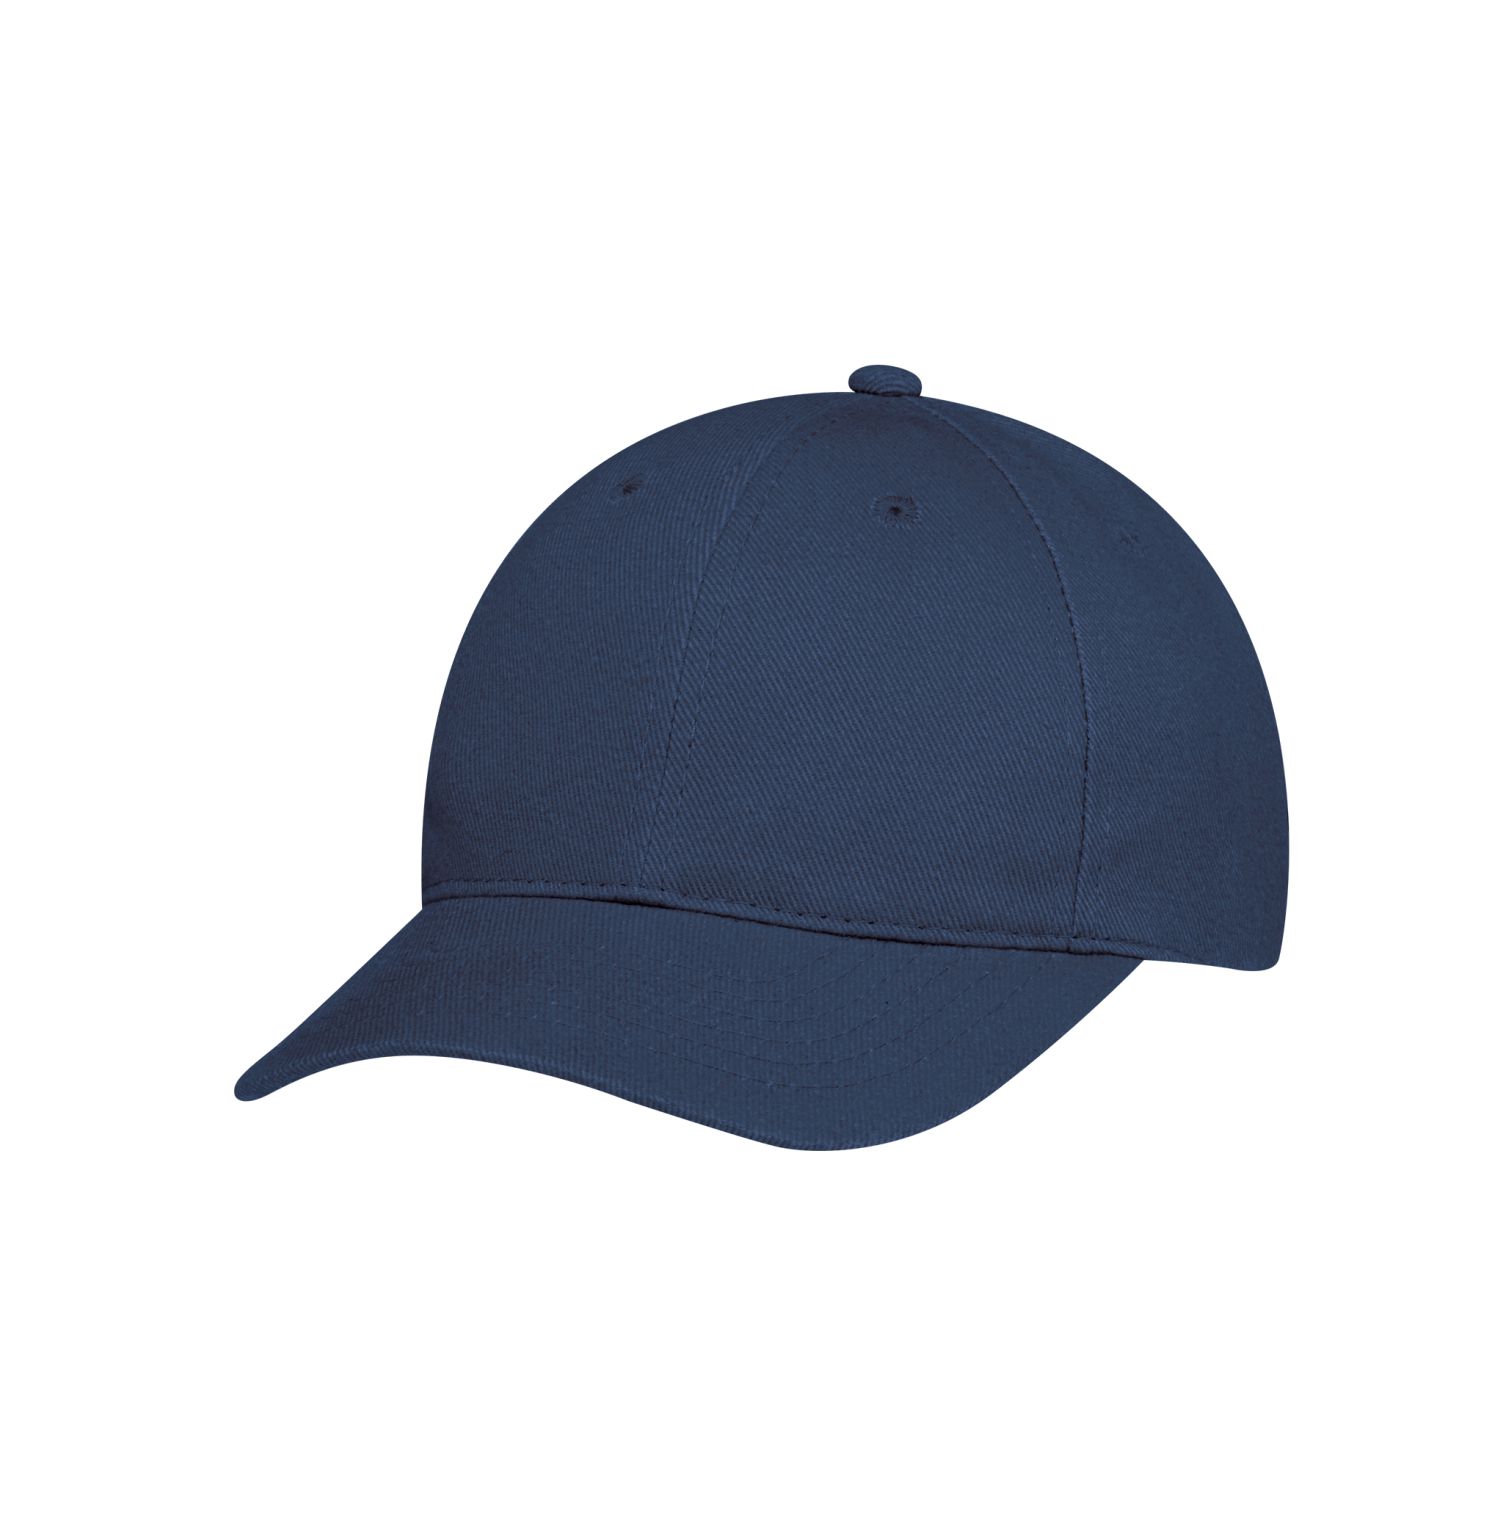 AJM Heavyweight Brushed Cotton Drill 6 Panel Constructed Contour Hat #2C390M Midnight Blue